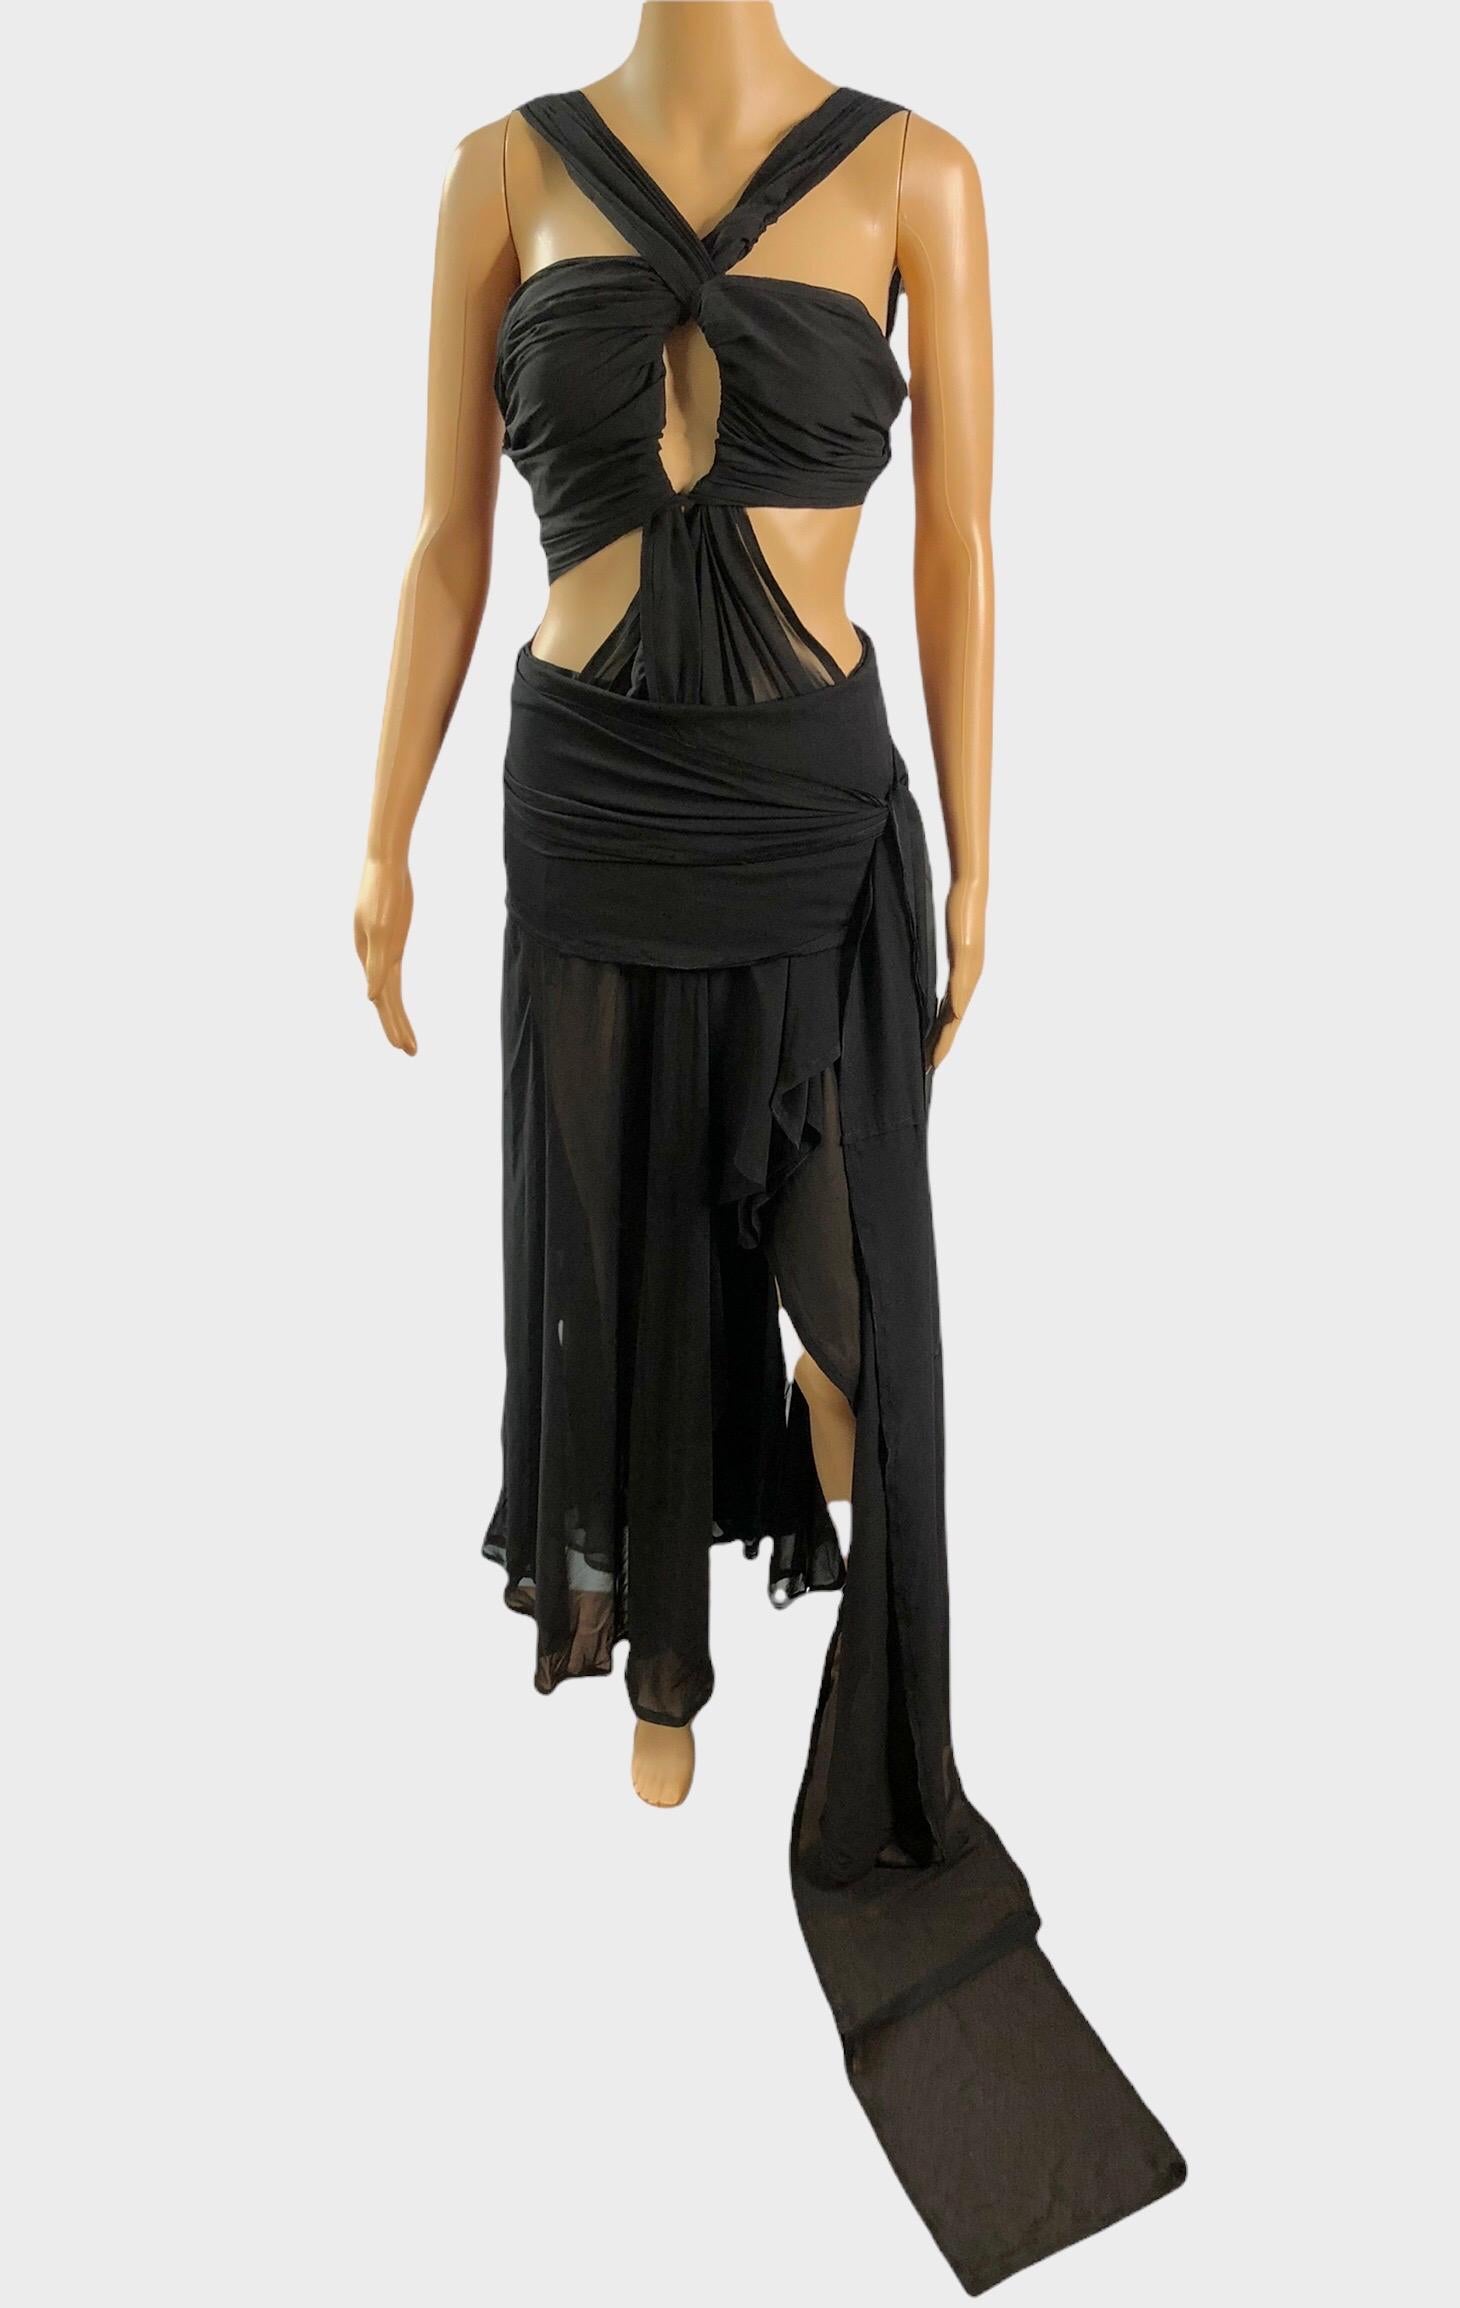 Tom Ford for Yves Saint Laurent S/S 2002 Runway Sheer Cutout Black Dress Gown For Sale 7